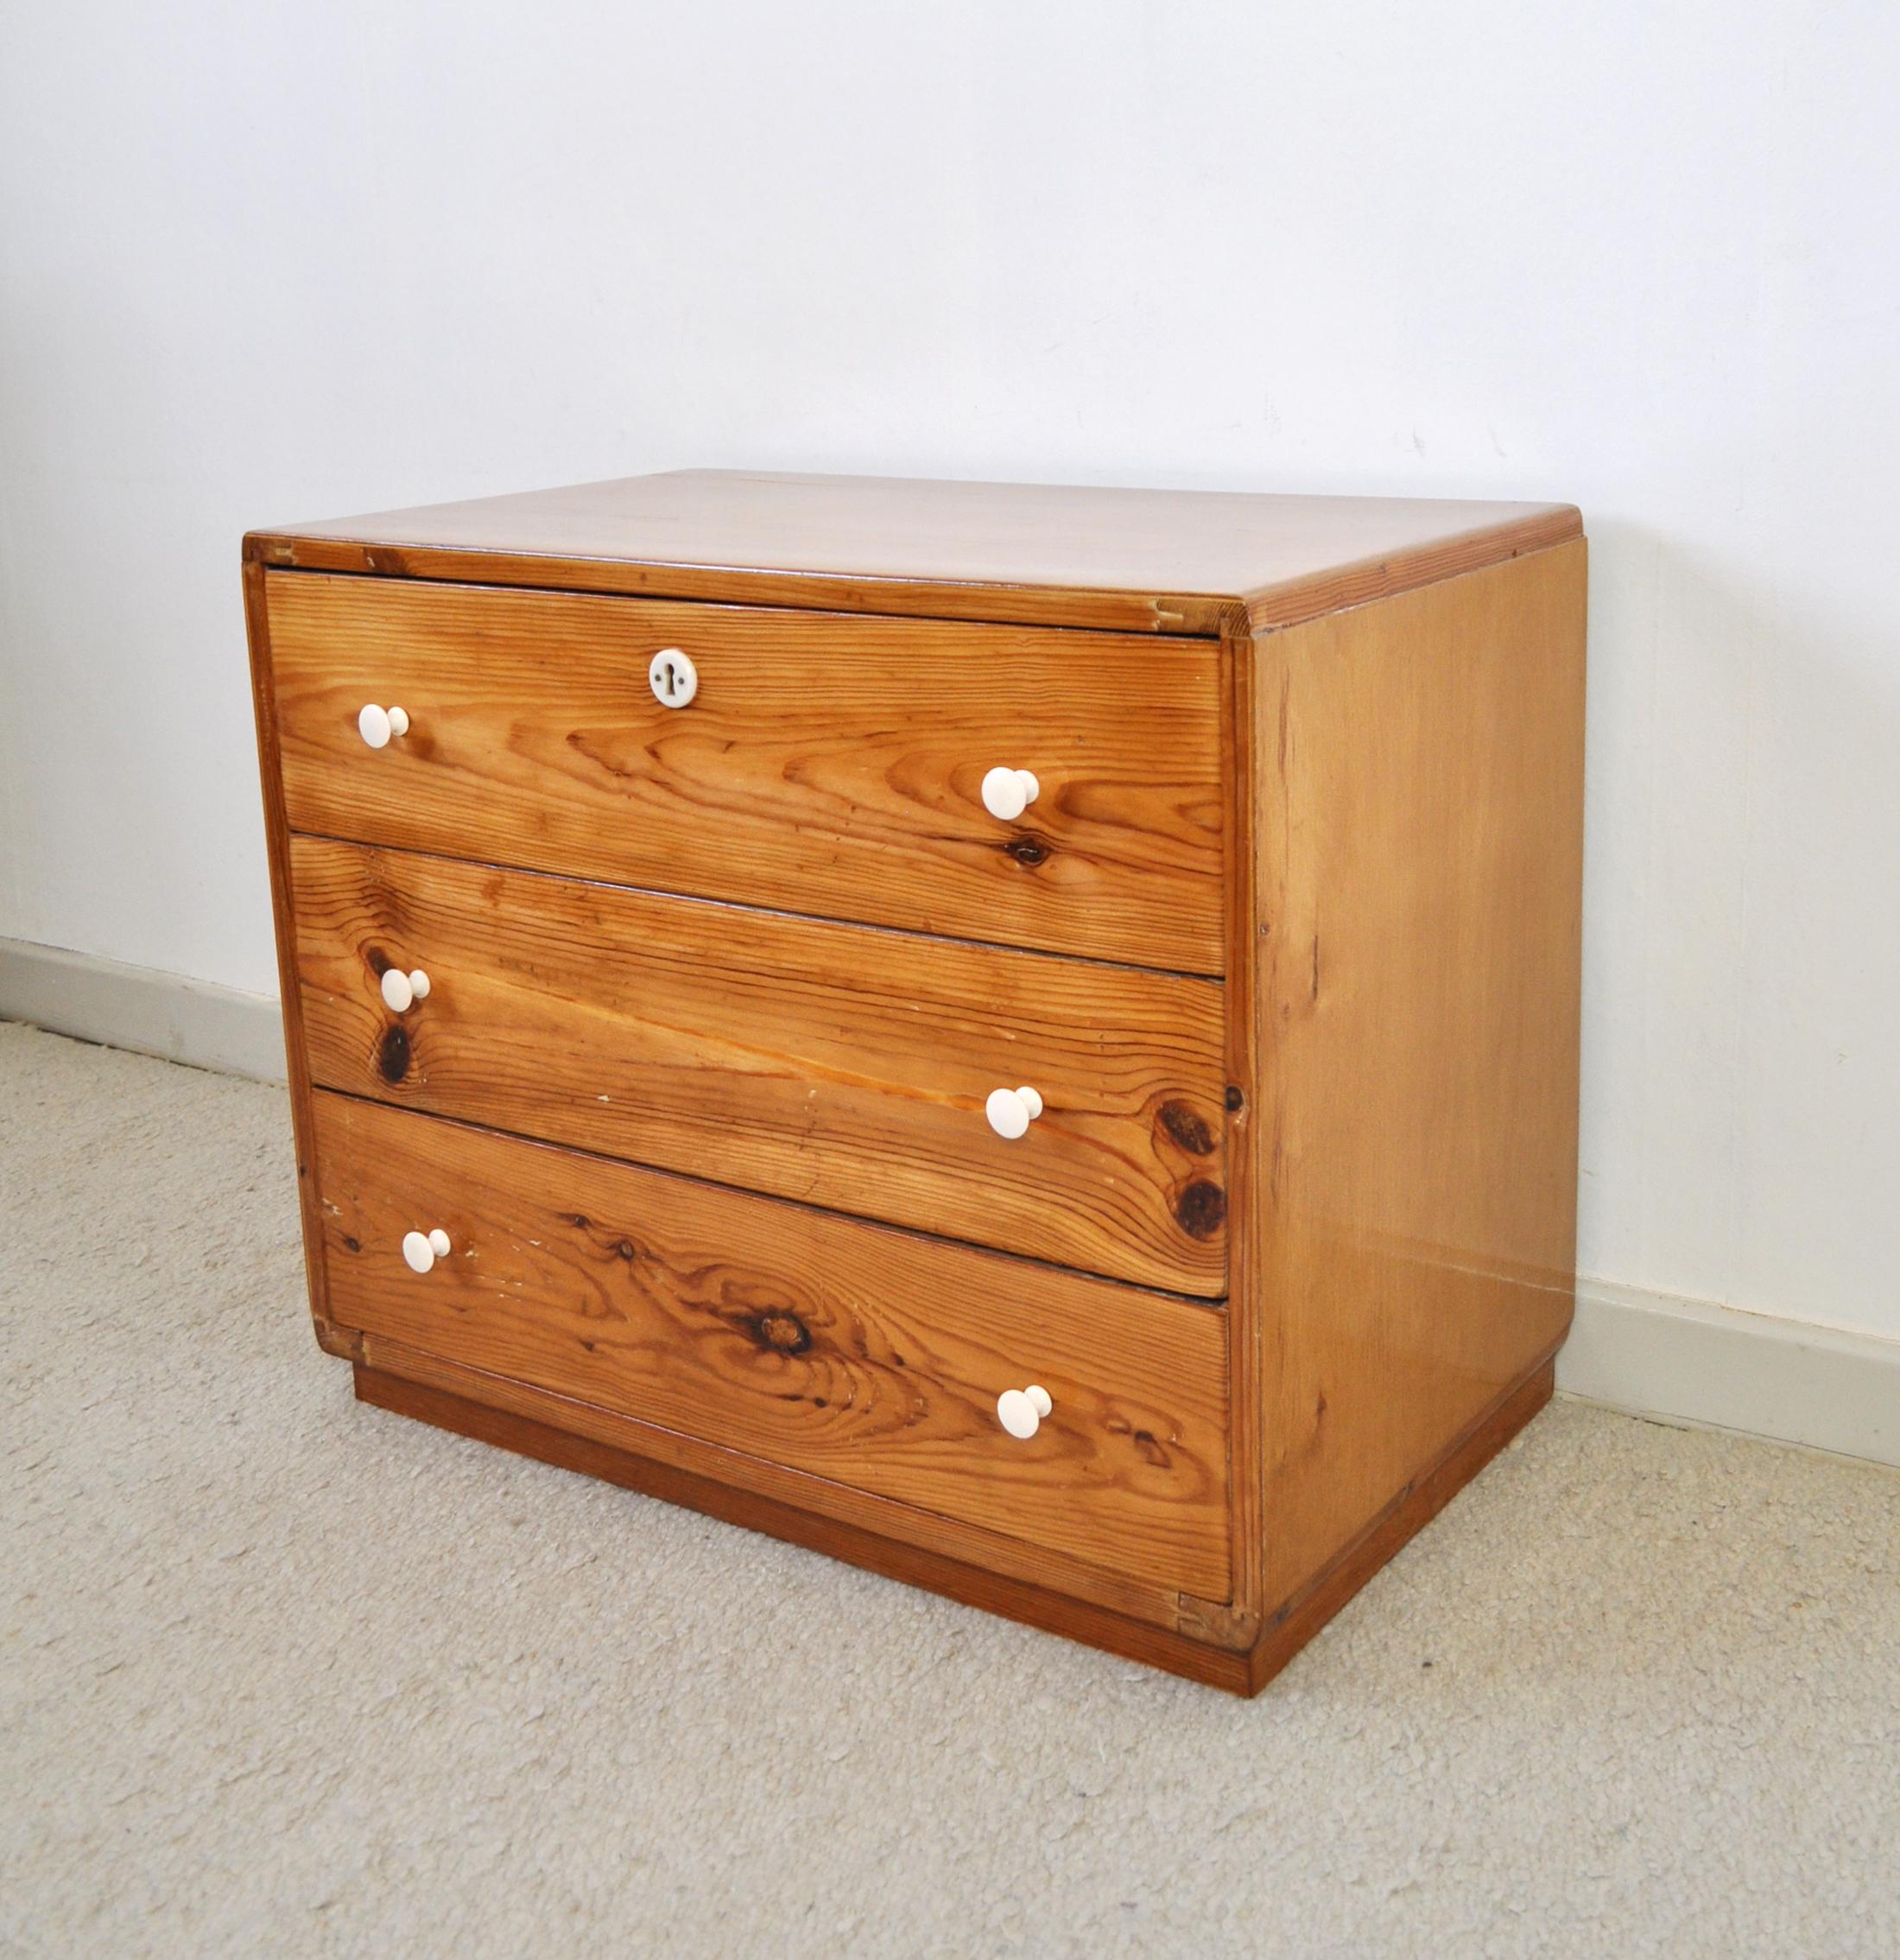 Danish chest of drawers made of solid pine and with sides of veneered beech, 1930s.
Produced in Denmark by Aarhus Emballagefabrik AS.
Restored, lacquered and repaired on the backside of the plinth.
The history of the producer goes back 1919 when